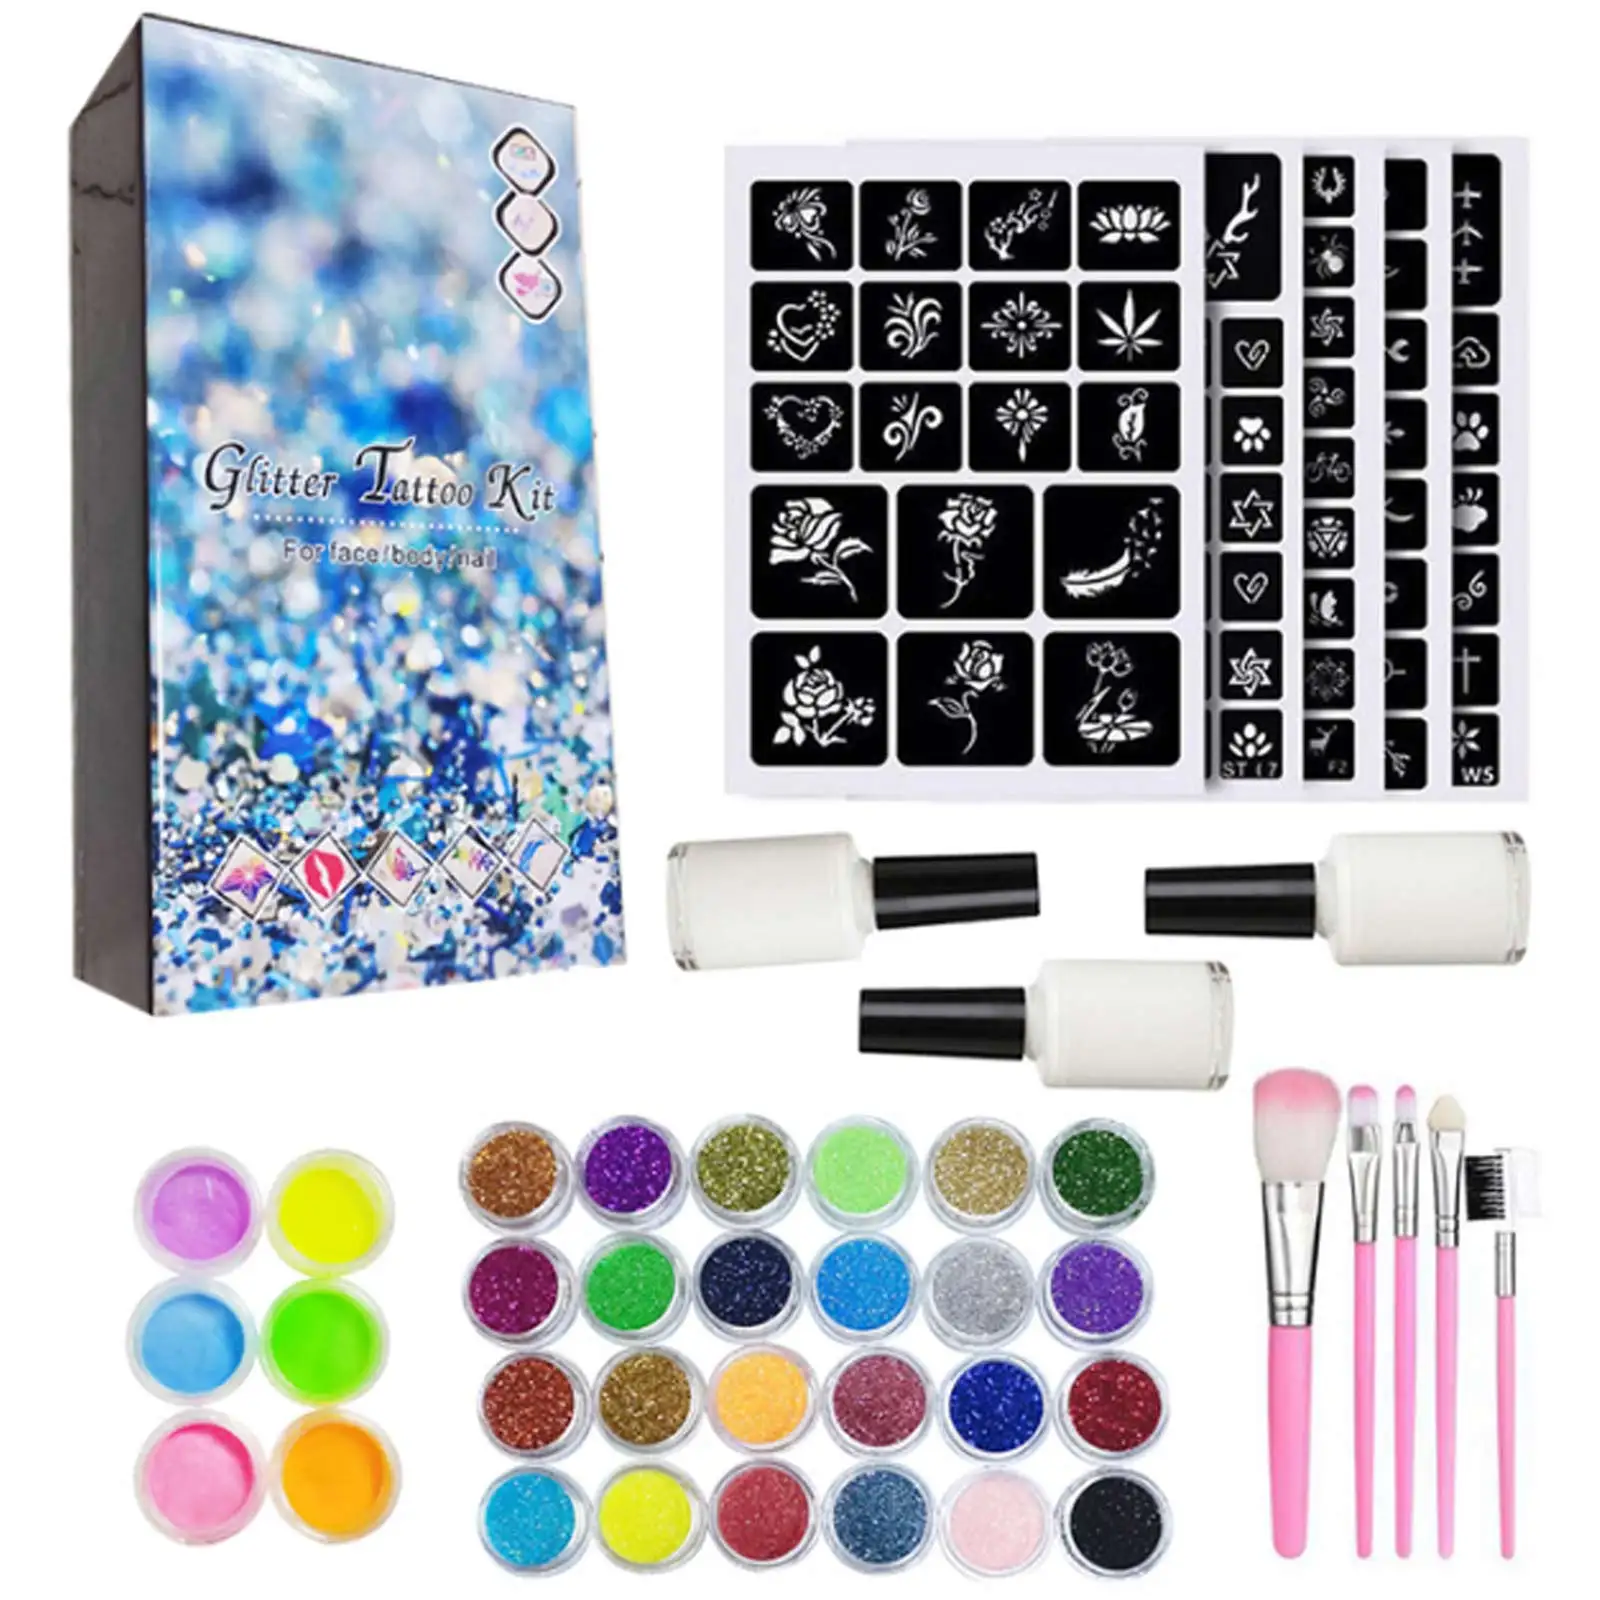 Temporary Glitter Tattoos Kit for Kids 200 Stencils 24 Glitter Colors 5 Brushes 3 Body Glue Sparkly Colorful Tattoos for Girls T ophir 20 colors shimmer glitter tattoo set w 30 stencils 2 glitter glue